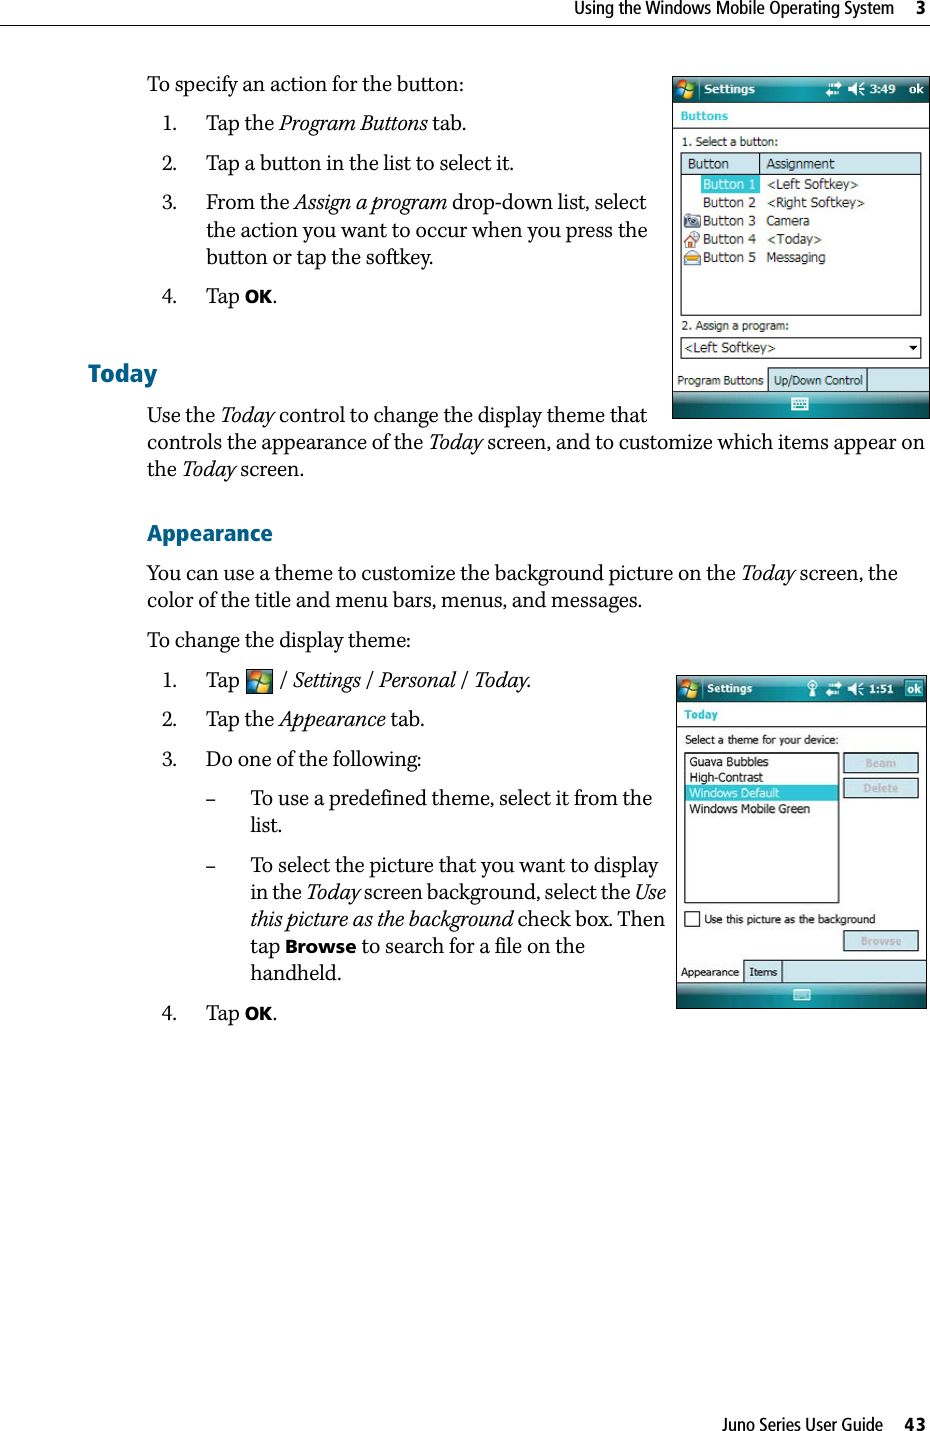 Juno Series User Guide     43Using the Windows Mobile Operating System     3To specify an action for the button: 1. Tap the Program Buttons tab.2. Tap a button in the list to select it.3. From the Assign a program drop-down list, select the action you want to occur when you press the button or tap the softkey.4. Tap OK.TodayUse the Today control to change the display theme that controls the appearance of the Today screen, and to customize which items appear on the Today screen.AppearanceYou can use a theme to customize the background picture on the Today screen, the color of the title and menu bars, menus, and messages.To change the display theme:1. Tap / Settings /Personal / Today.  2. Tap the Appearance tab.  3. Do one of the following:–To use a predefined theme, select it from the list.–To select the picture that you want to display in the Today screen background, select the Use this picture as the background check box. Then tap Browse to search for a file on the handheld.4. Tap OK.